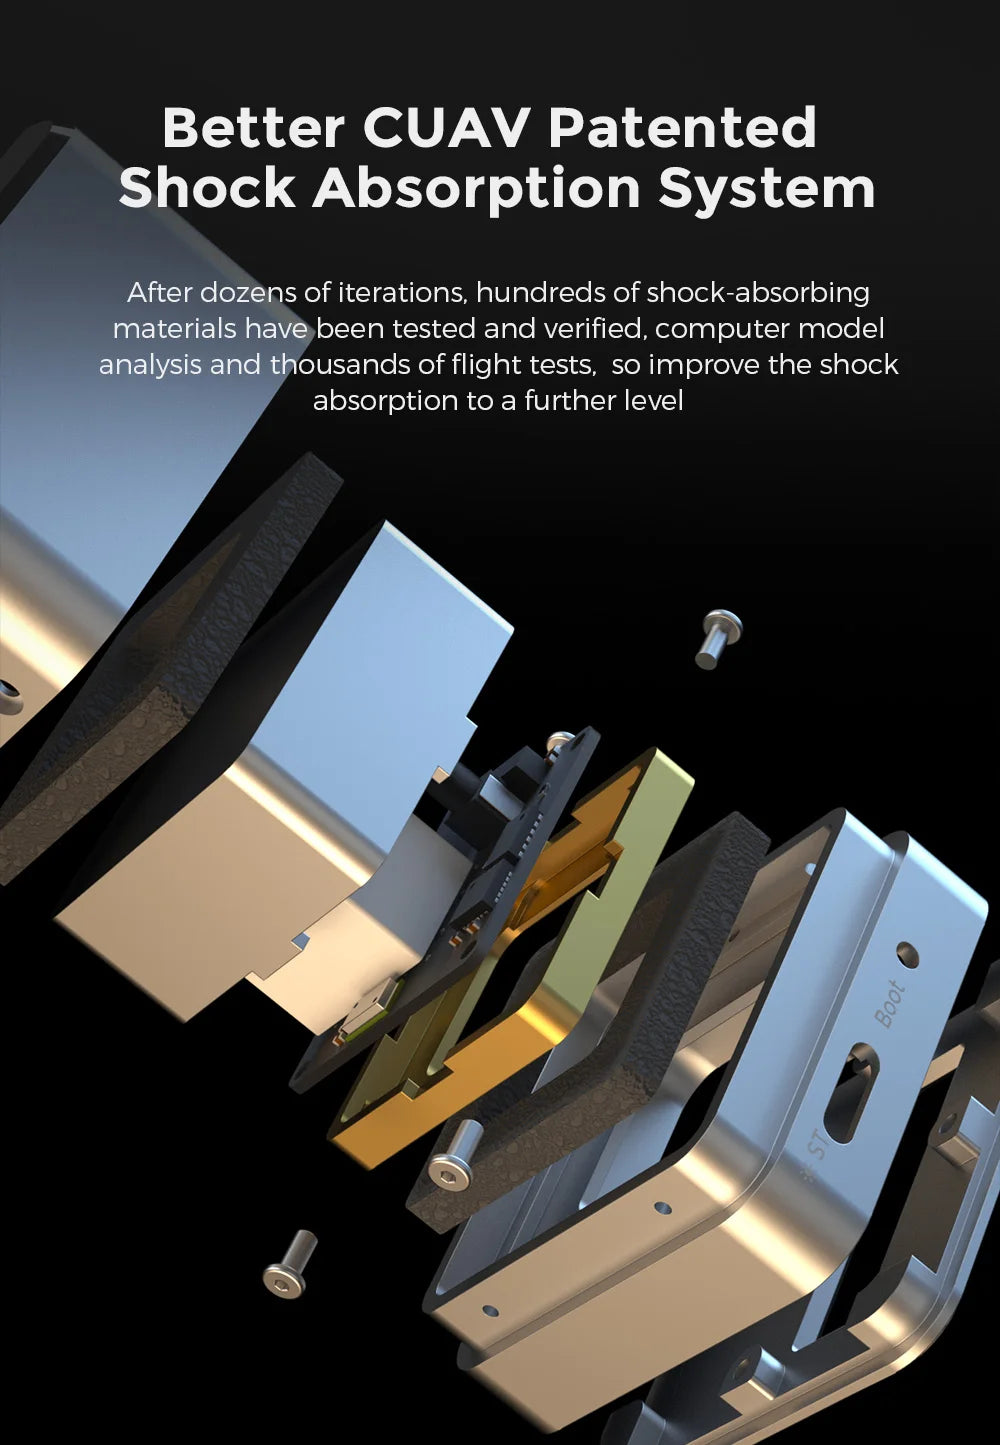 CUAV Patented Better Shock Absorption System . hundreds of iterations